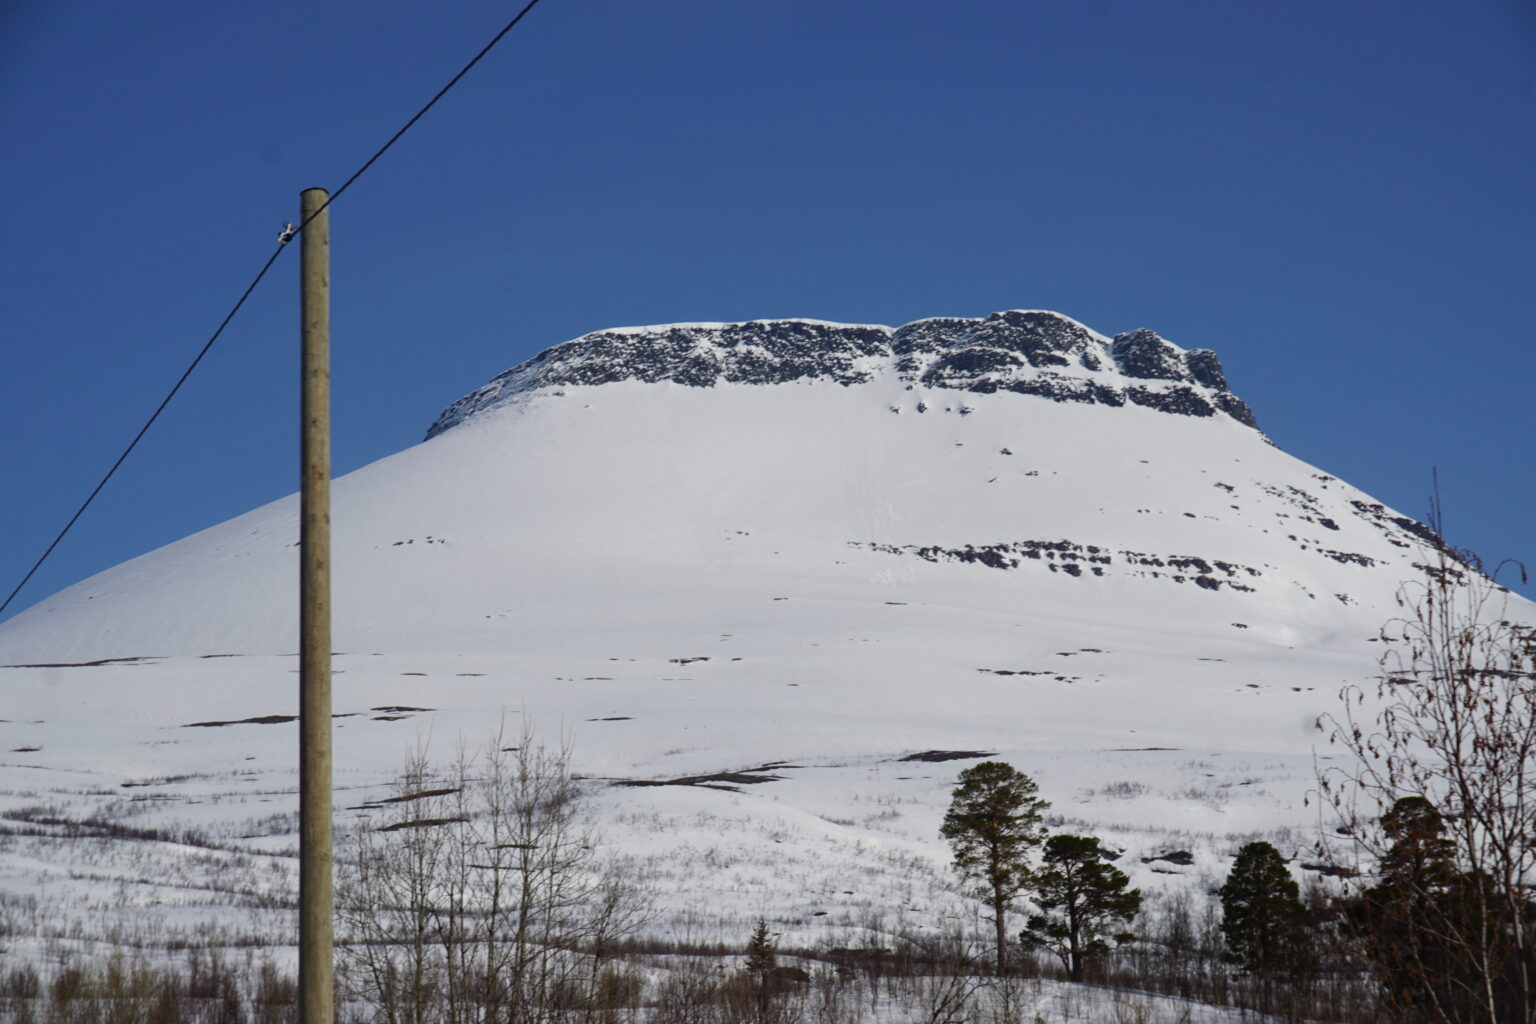 Looking up at Háhttagáisi from the road